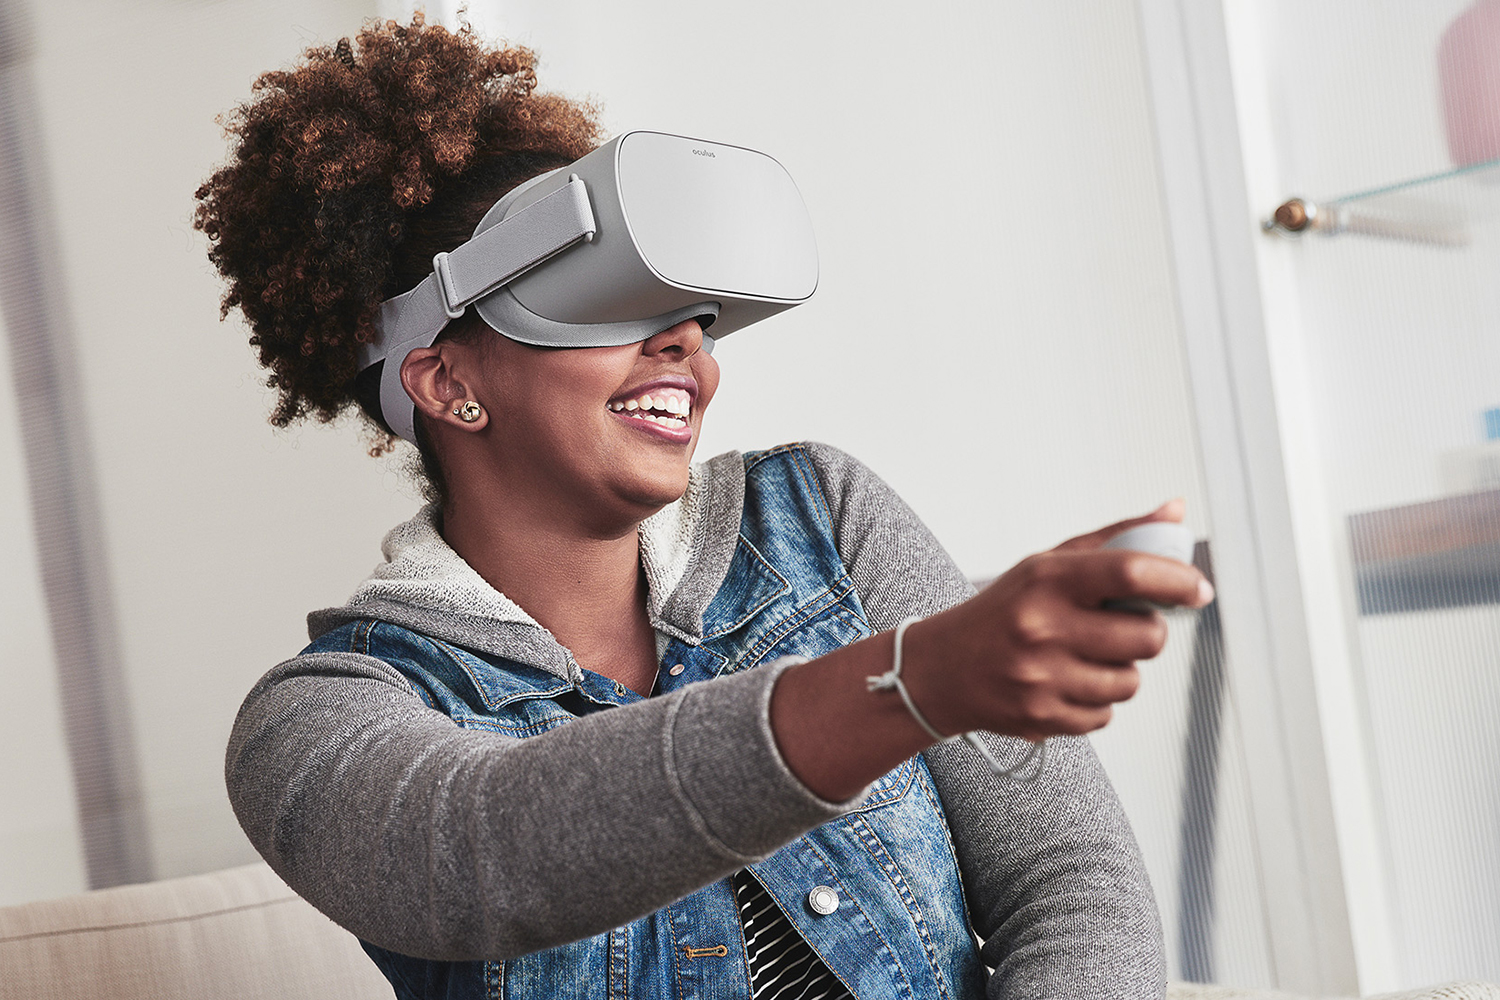 More Than 1,000 VR Experiences Are for Go | Trends